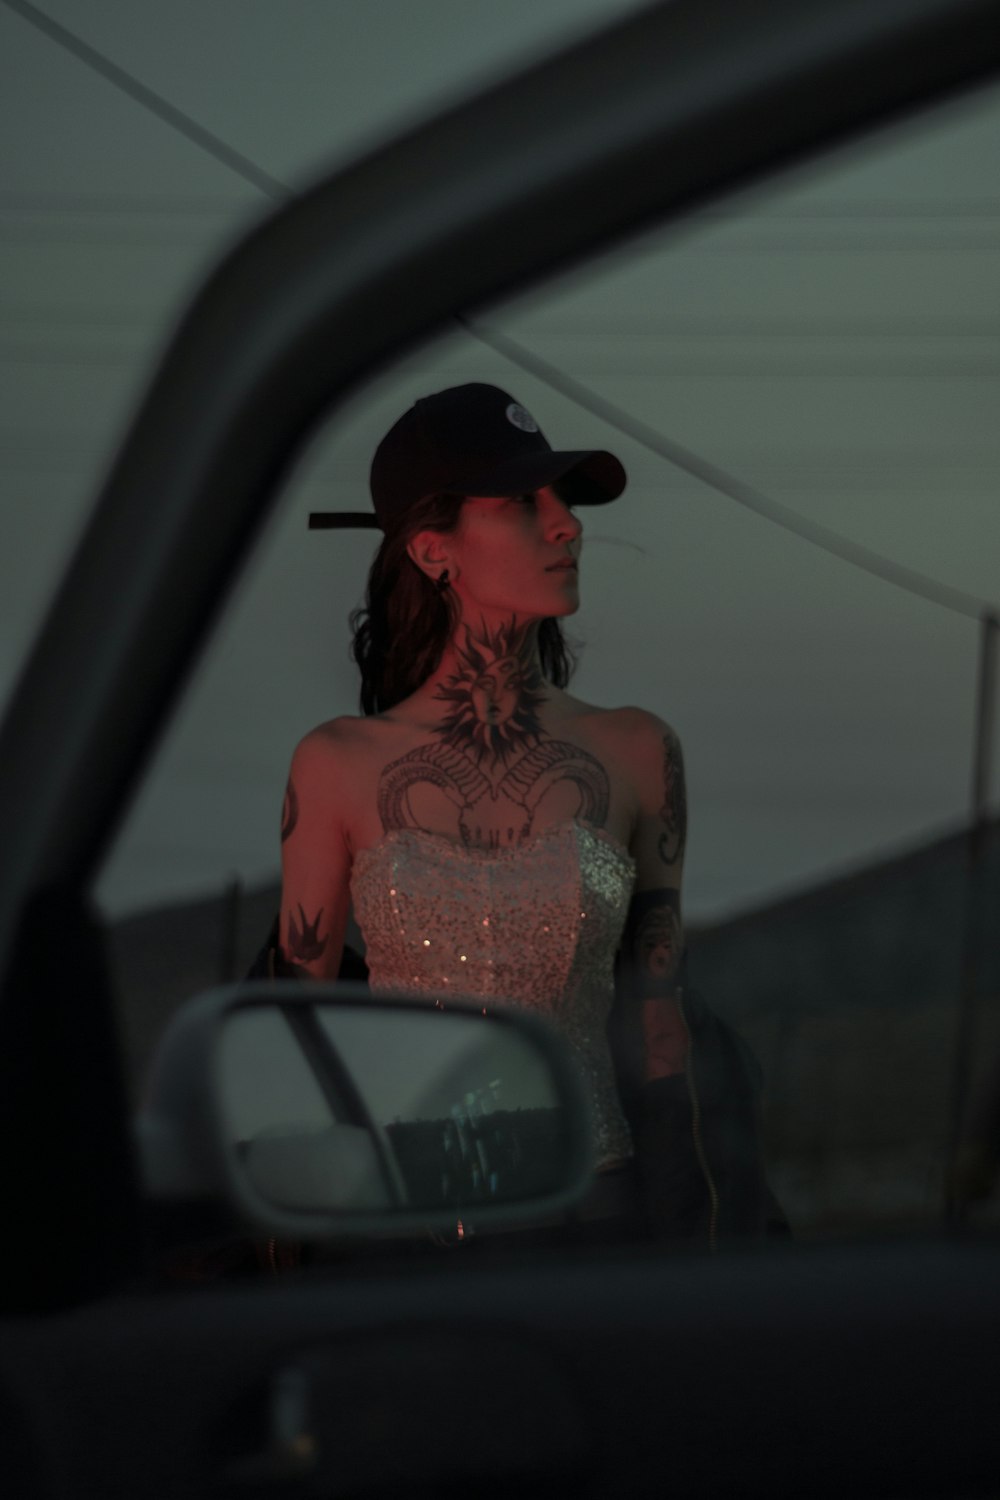 a woman with tattoos standing in front of a car